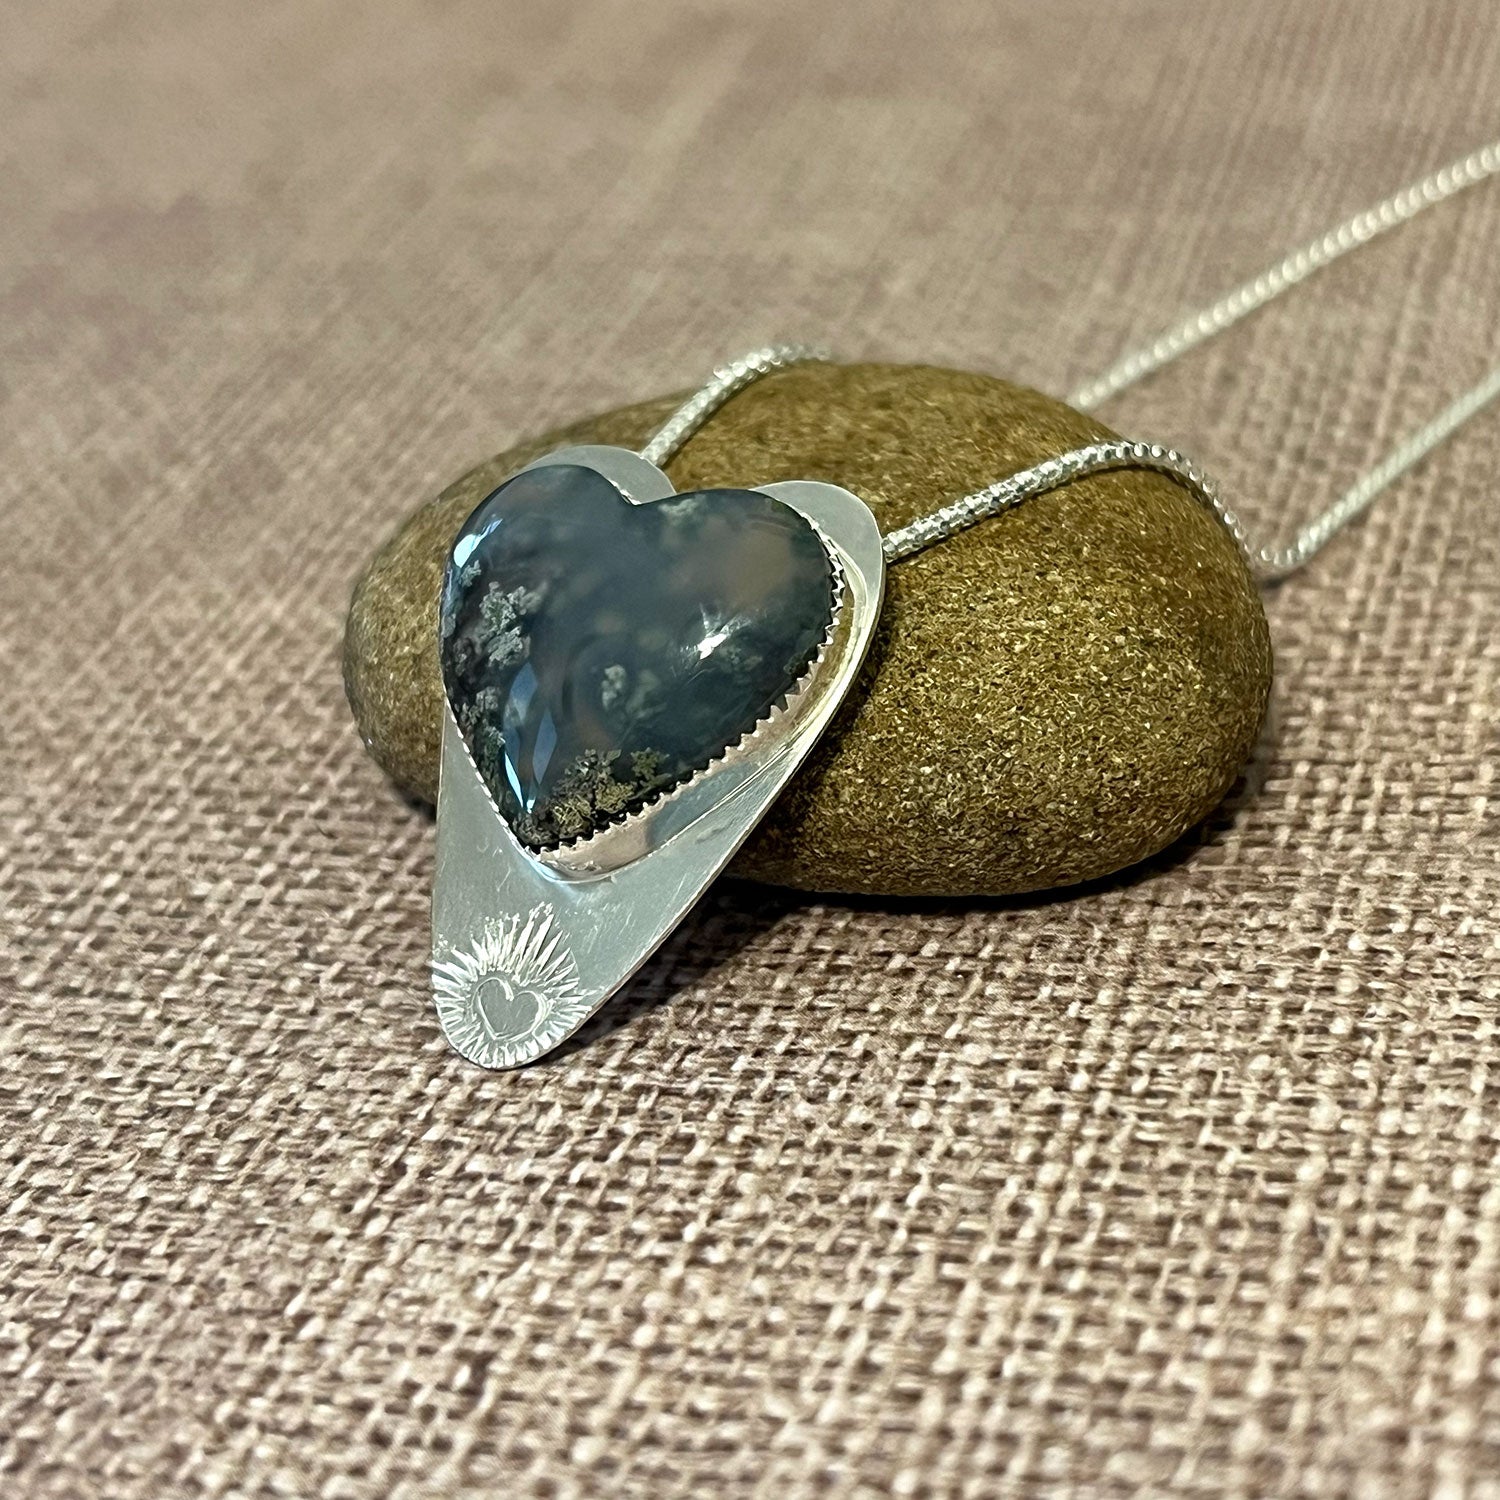 STERLING SILVER BLUE MOSS AGATE HEART NECKLACE - PROTECTIVE EMBRACE TALISMAN